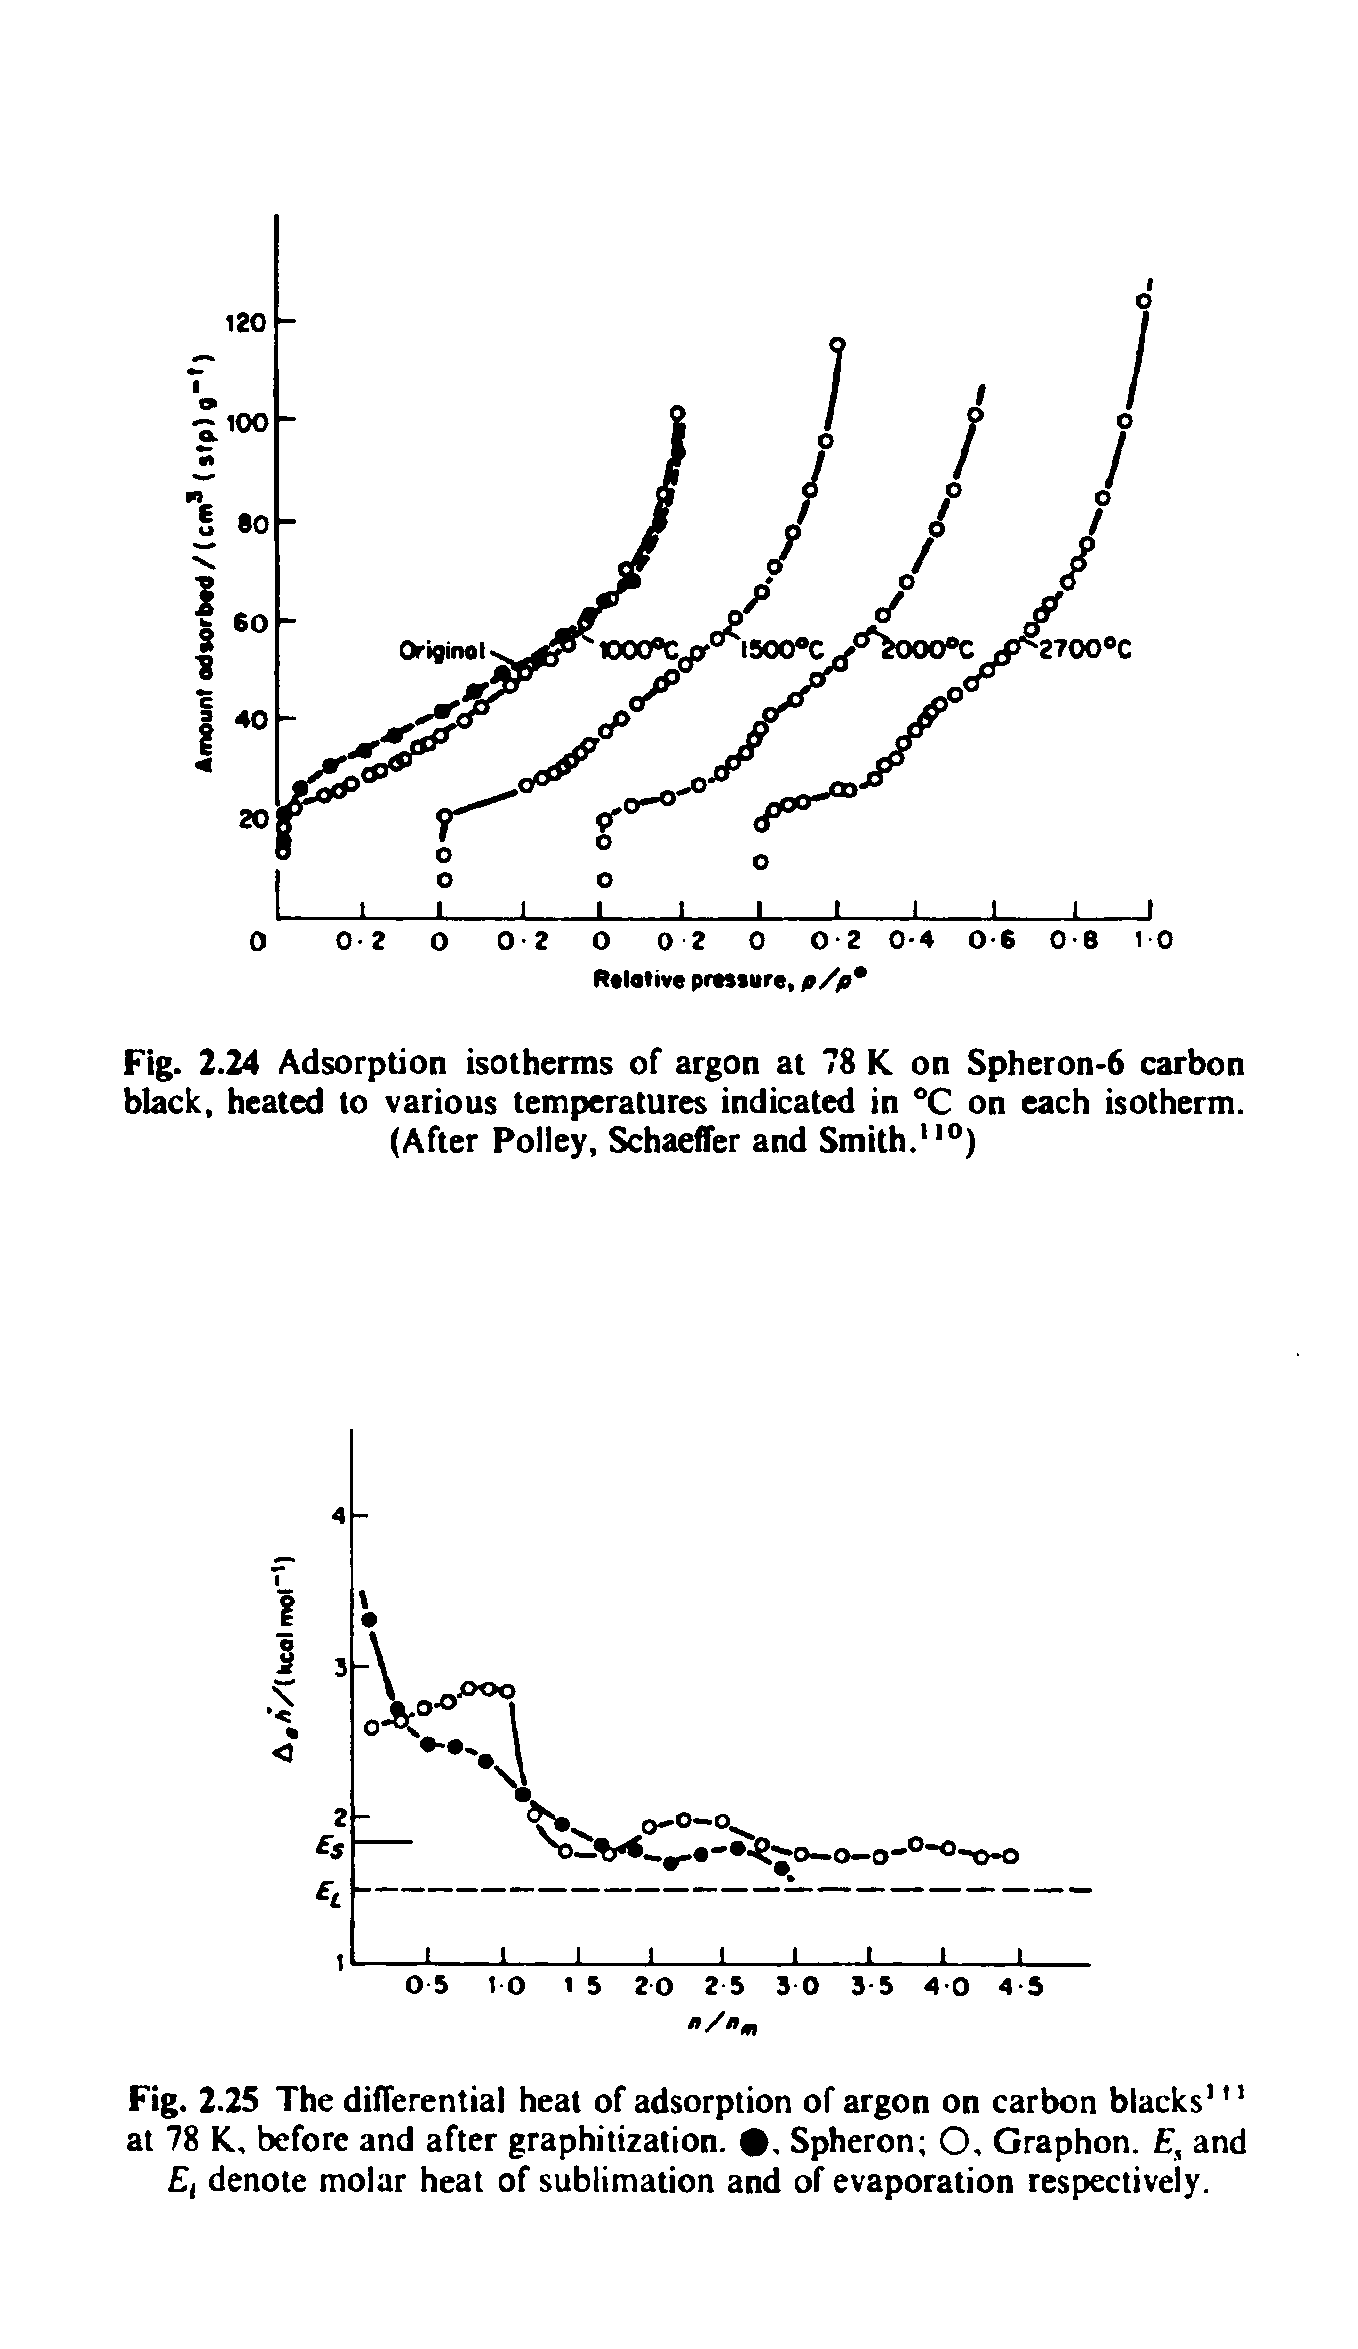 Fig. 2.25 The differential heat of adsorption of argon on carbon blacks at 78 K, before and after graphitizalion.. Spheron O, Graphon. , and El denote molar heat of sublimation and of evaporation respectively.